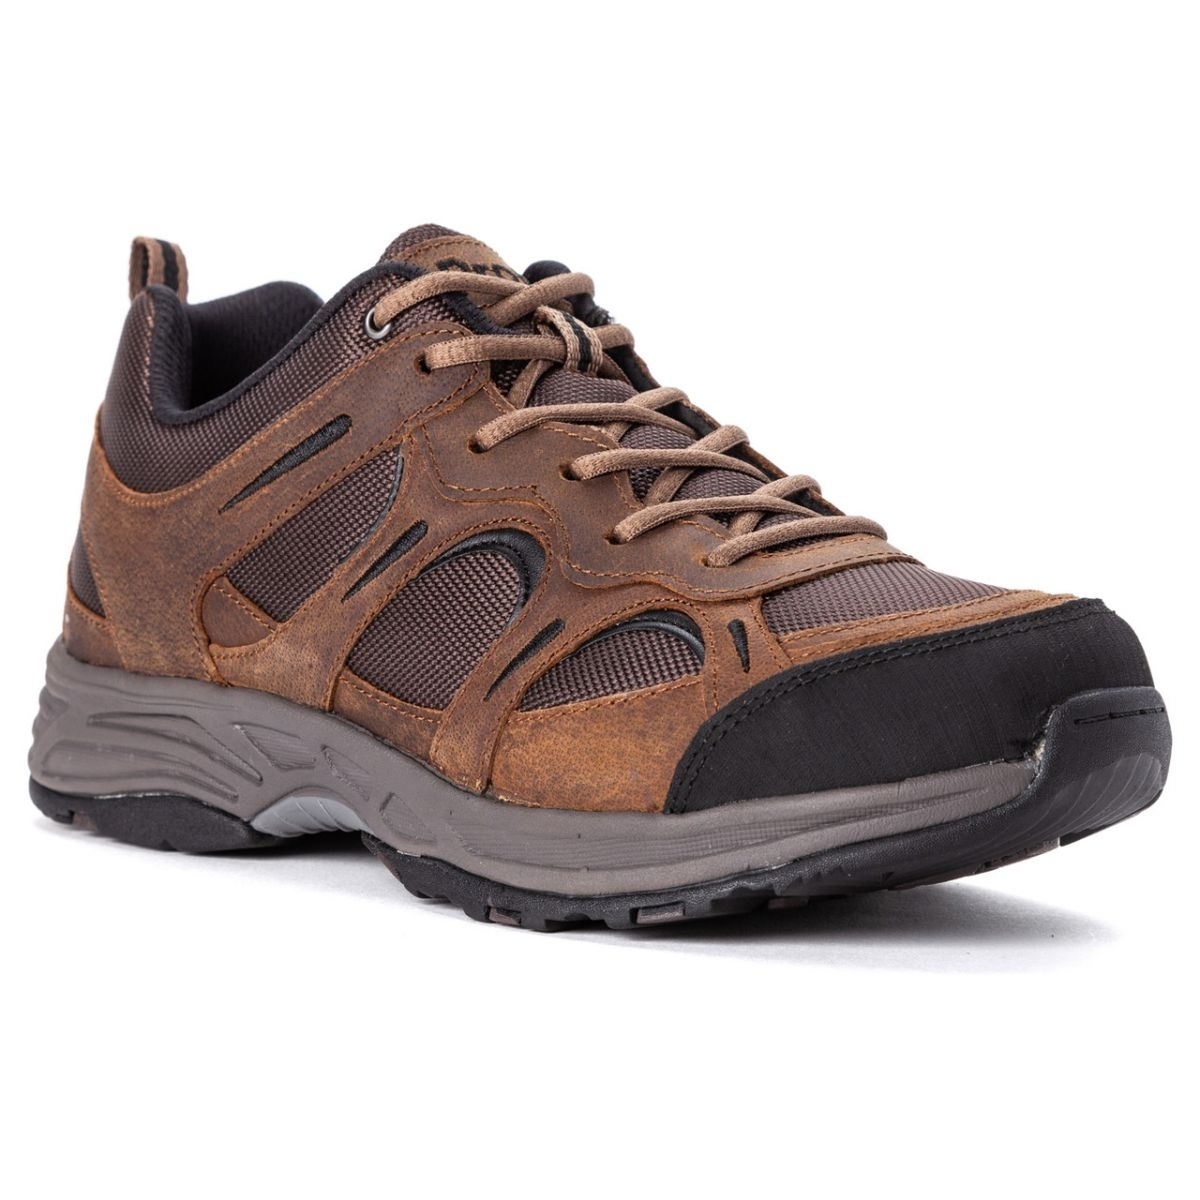 Propet Men's Connelly Hiking Shoe Brown - M5503BR BROWN - BROWN, 8-D